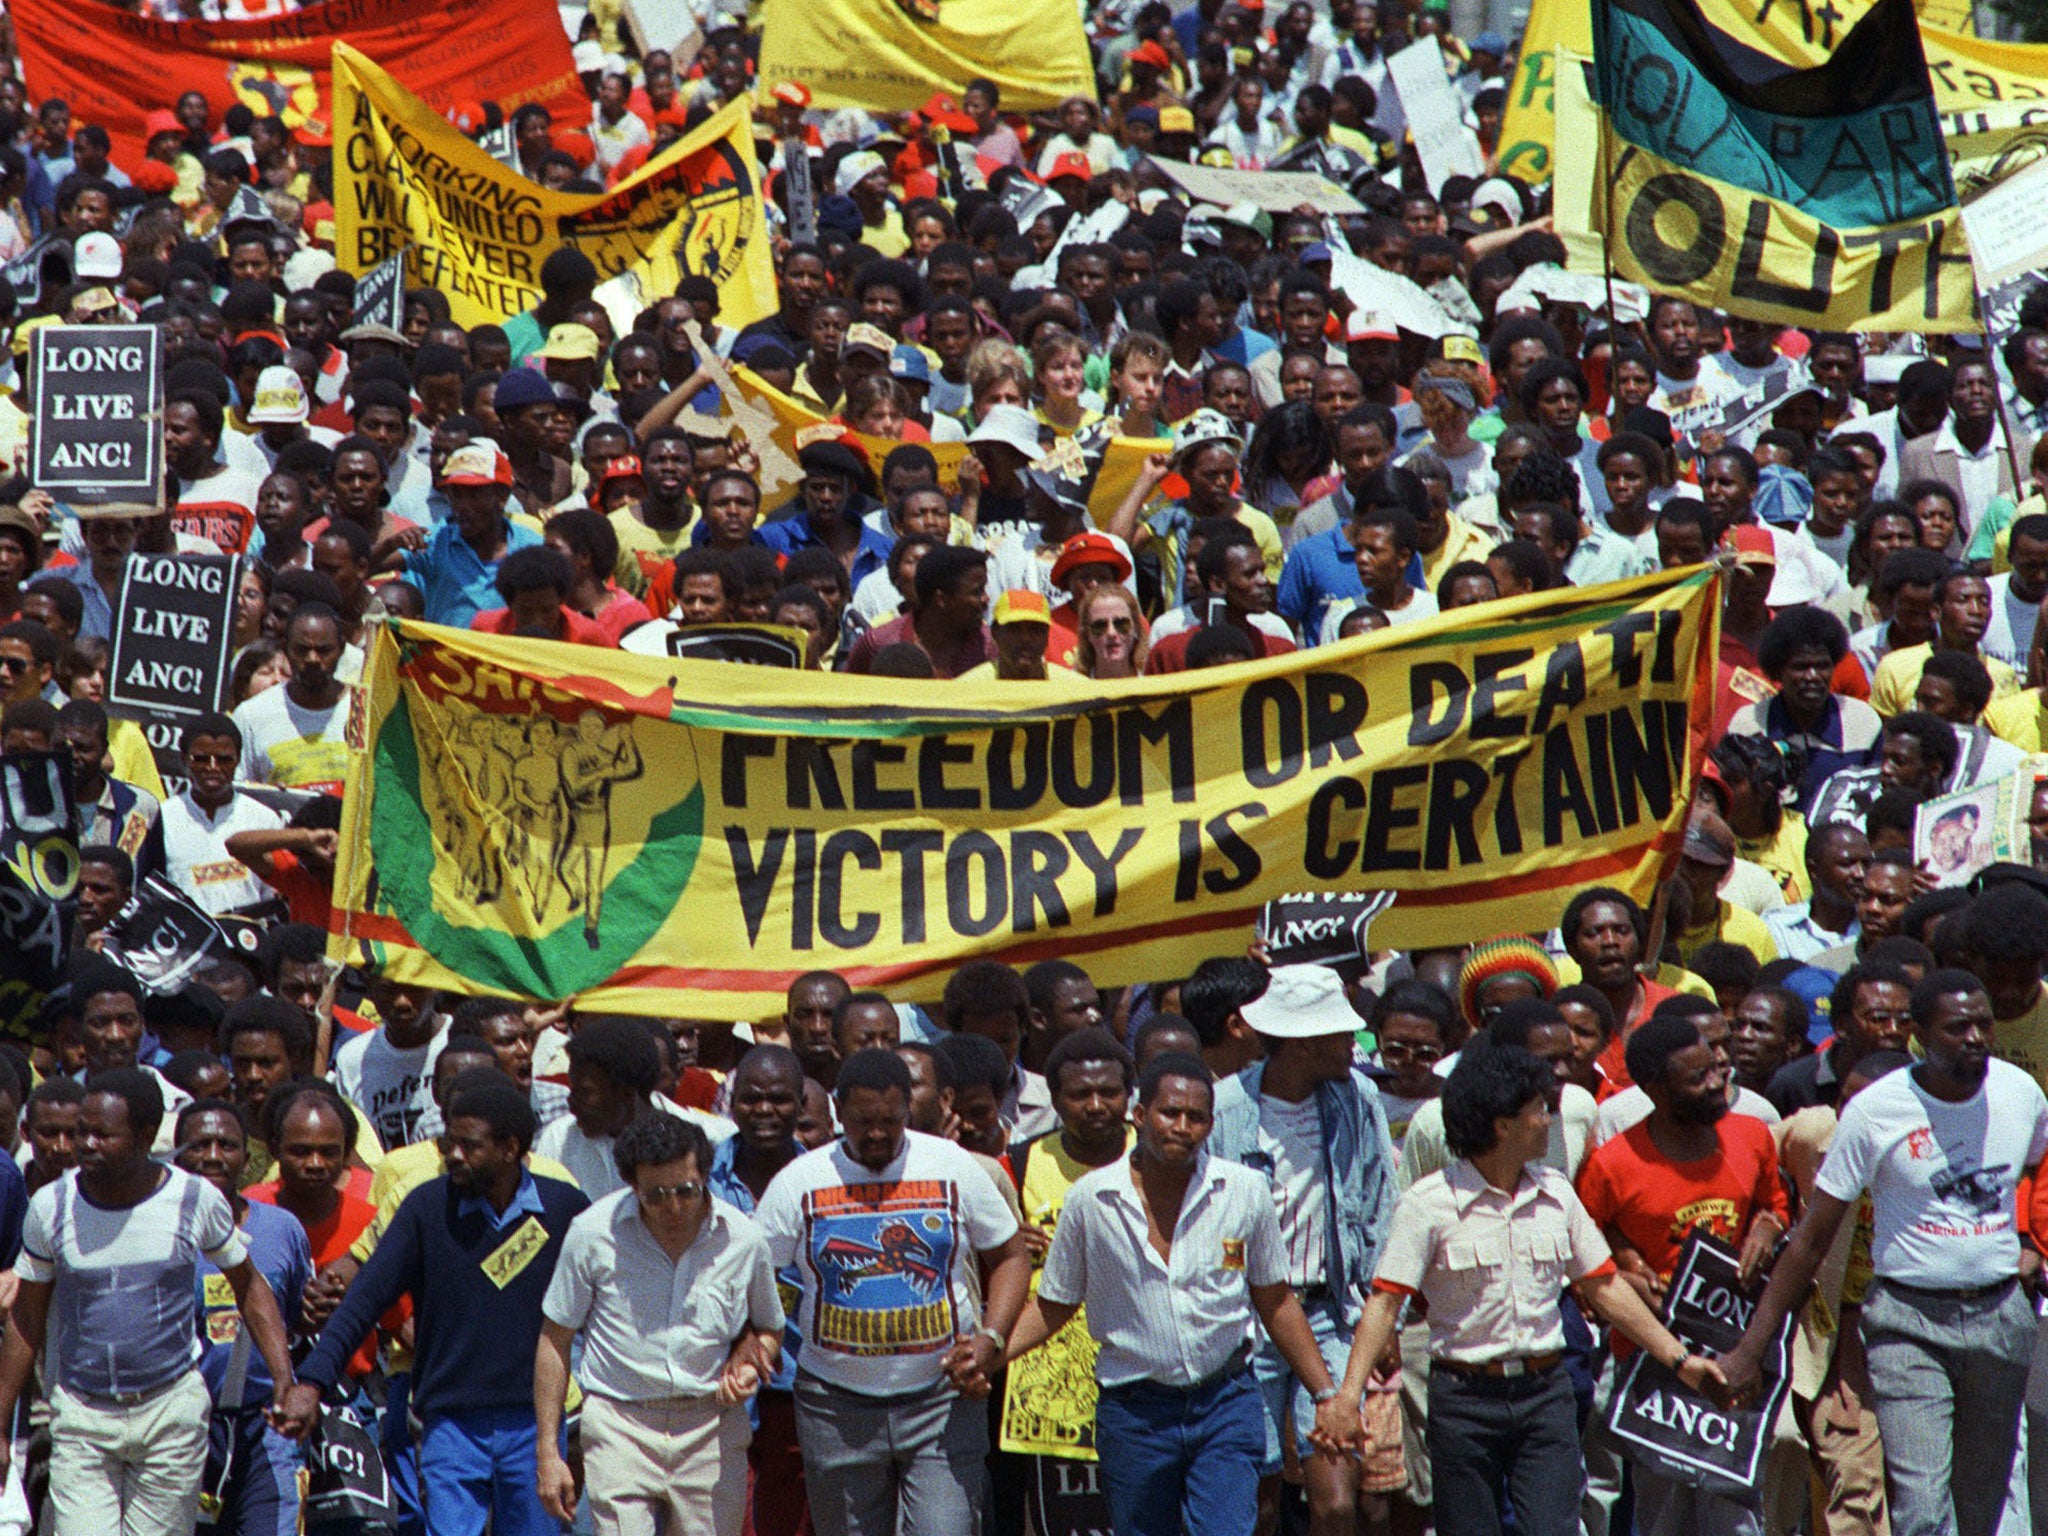 Demonstrators hold an anti-apartheid protest march through Johannesburg on 14 October 1989